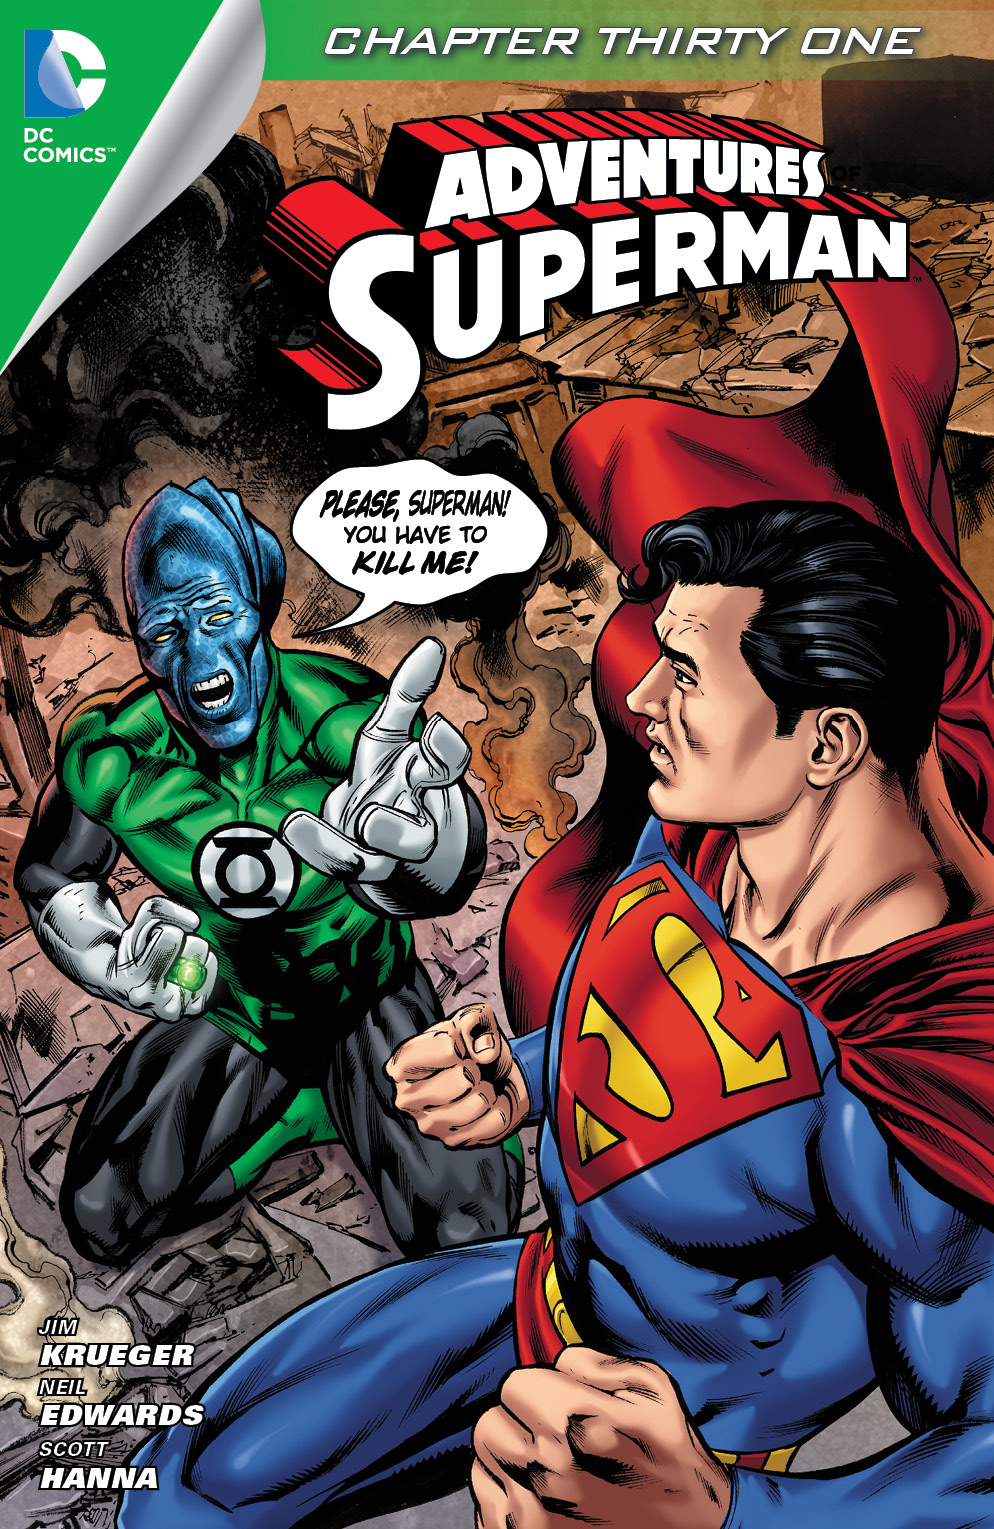 Adventures of Superman (2013-) #31 preview images